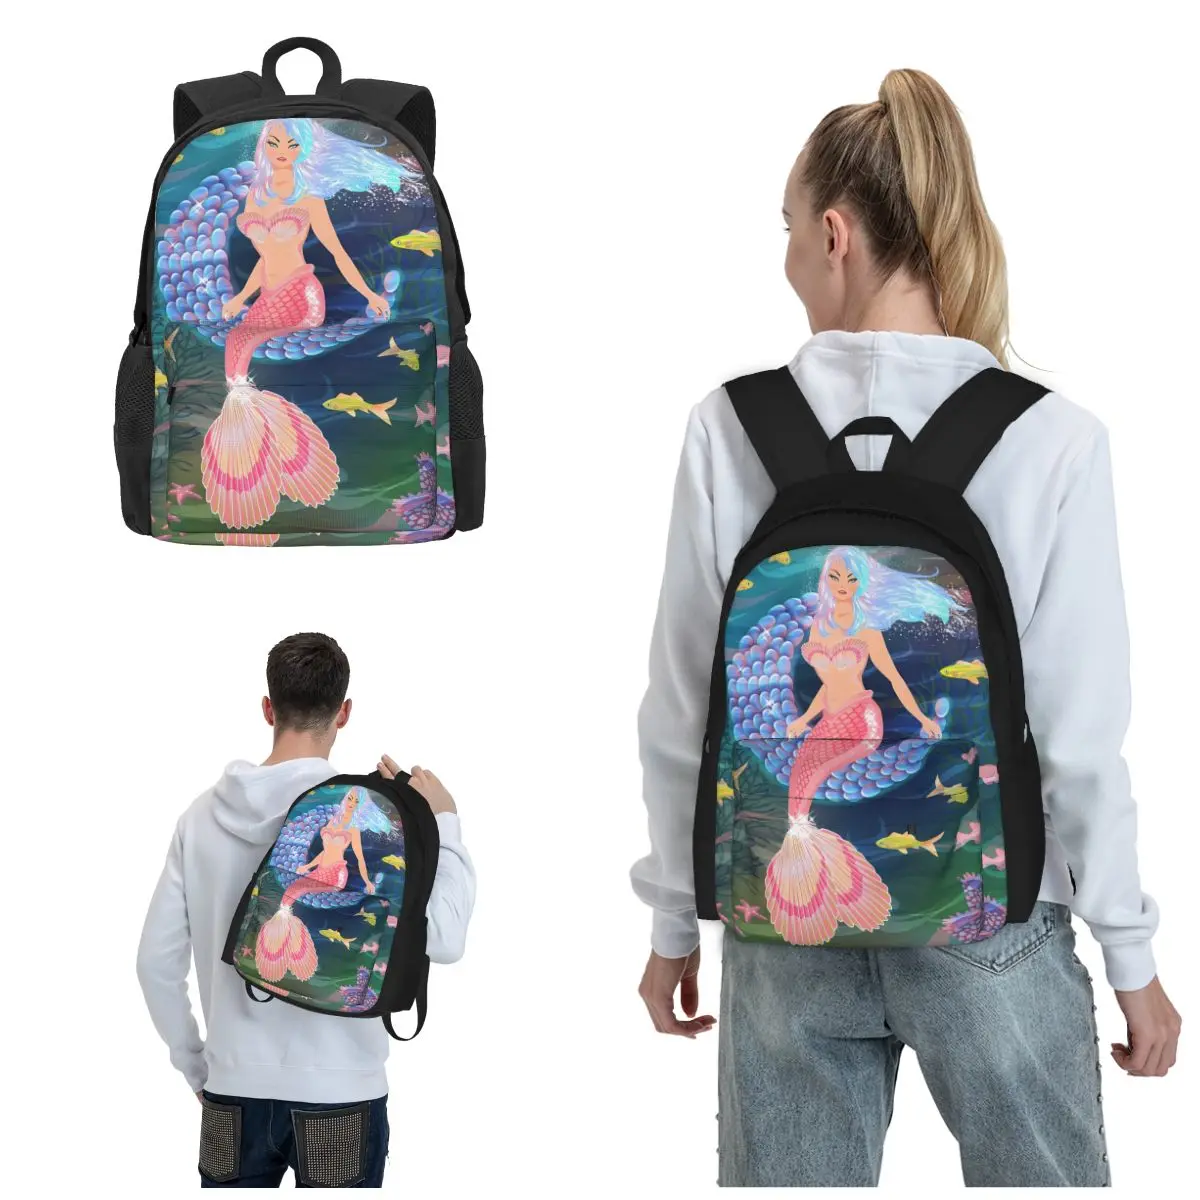 

Mermaid Backpacks Men'S Unleash Your Creativity With Our Customizable Backpack Options Travel Sport Outdoor Storage Bag